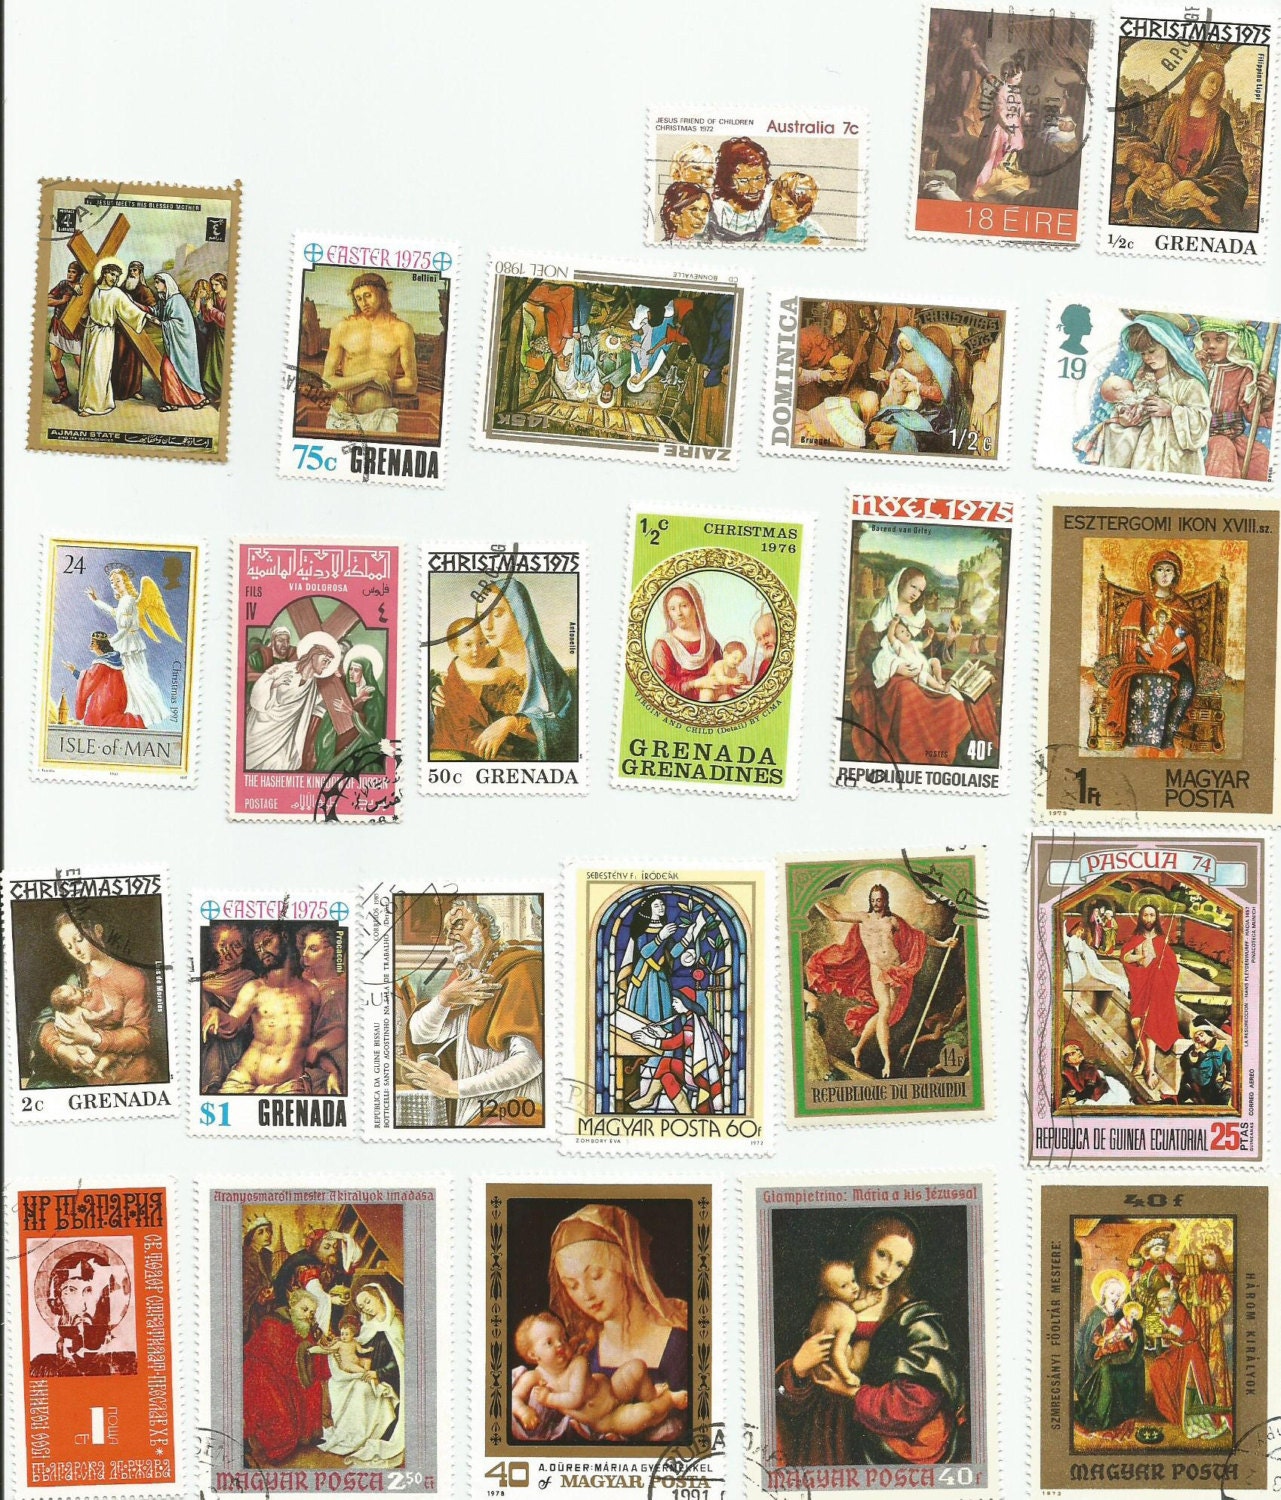 25 Religious Art Used Postage Stamps mix C by LarkroseInspirations